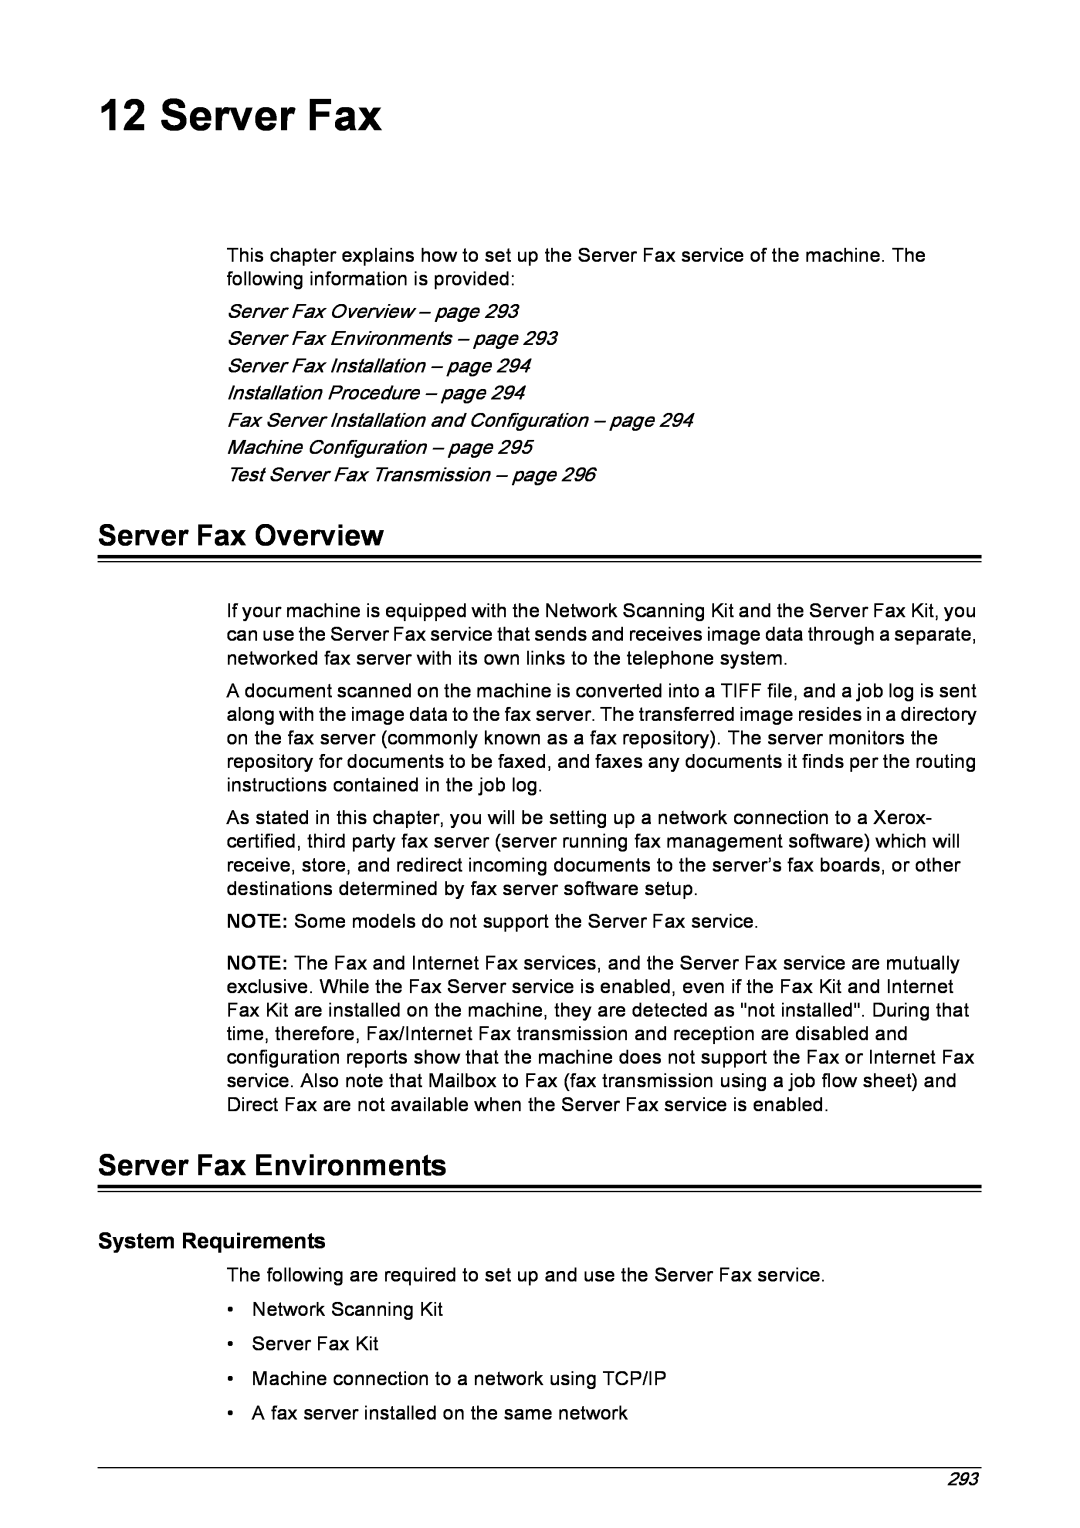 Xerox 5222 manual Server Fax Overview – page, Server Fax Environments – page, Server Fax Installation – page 